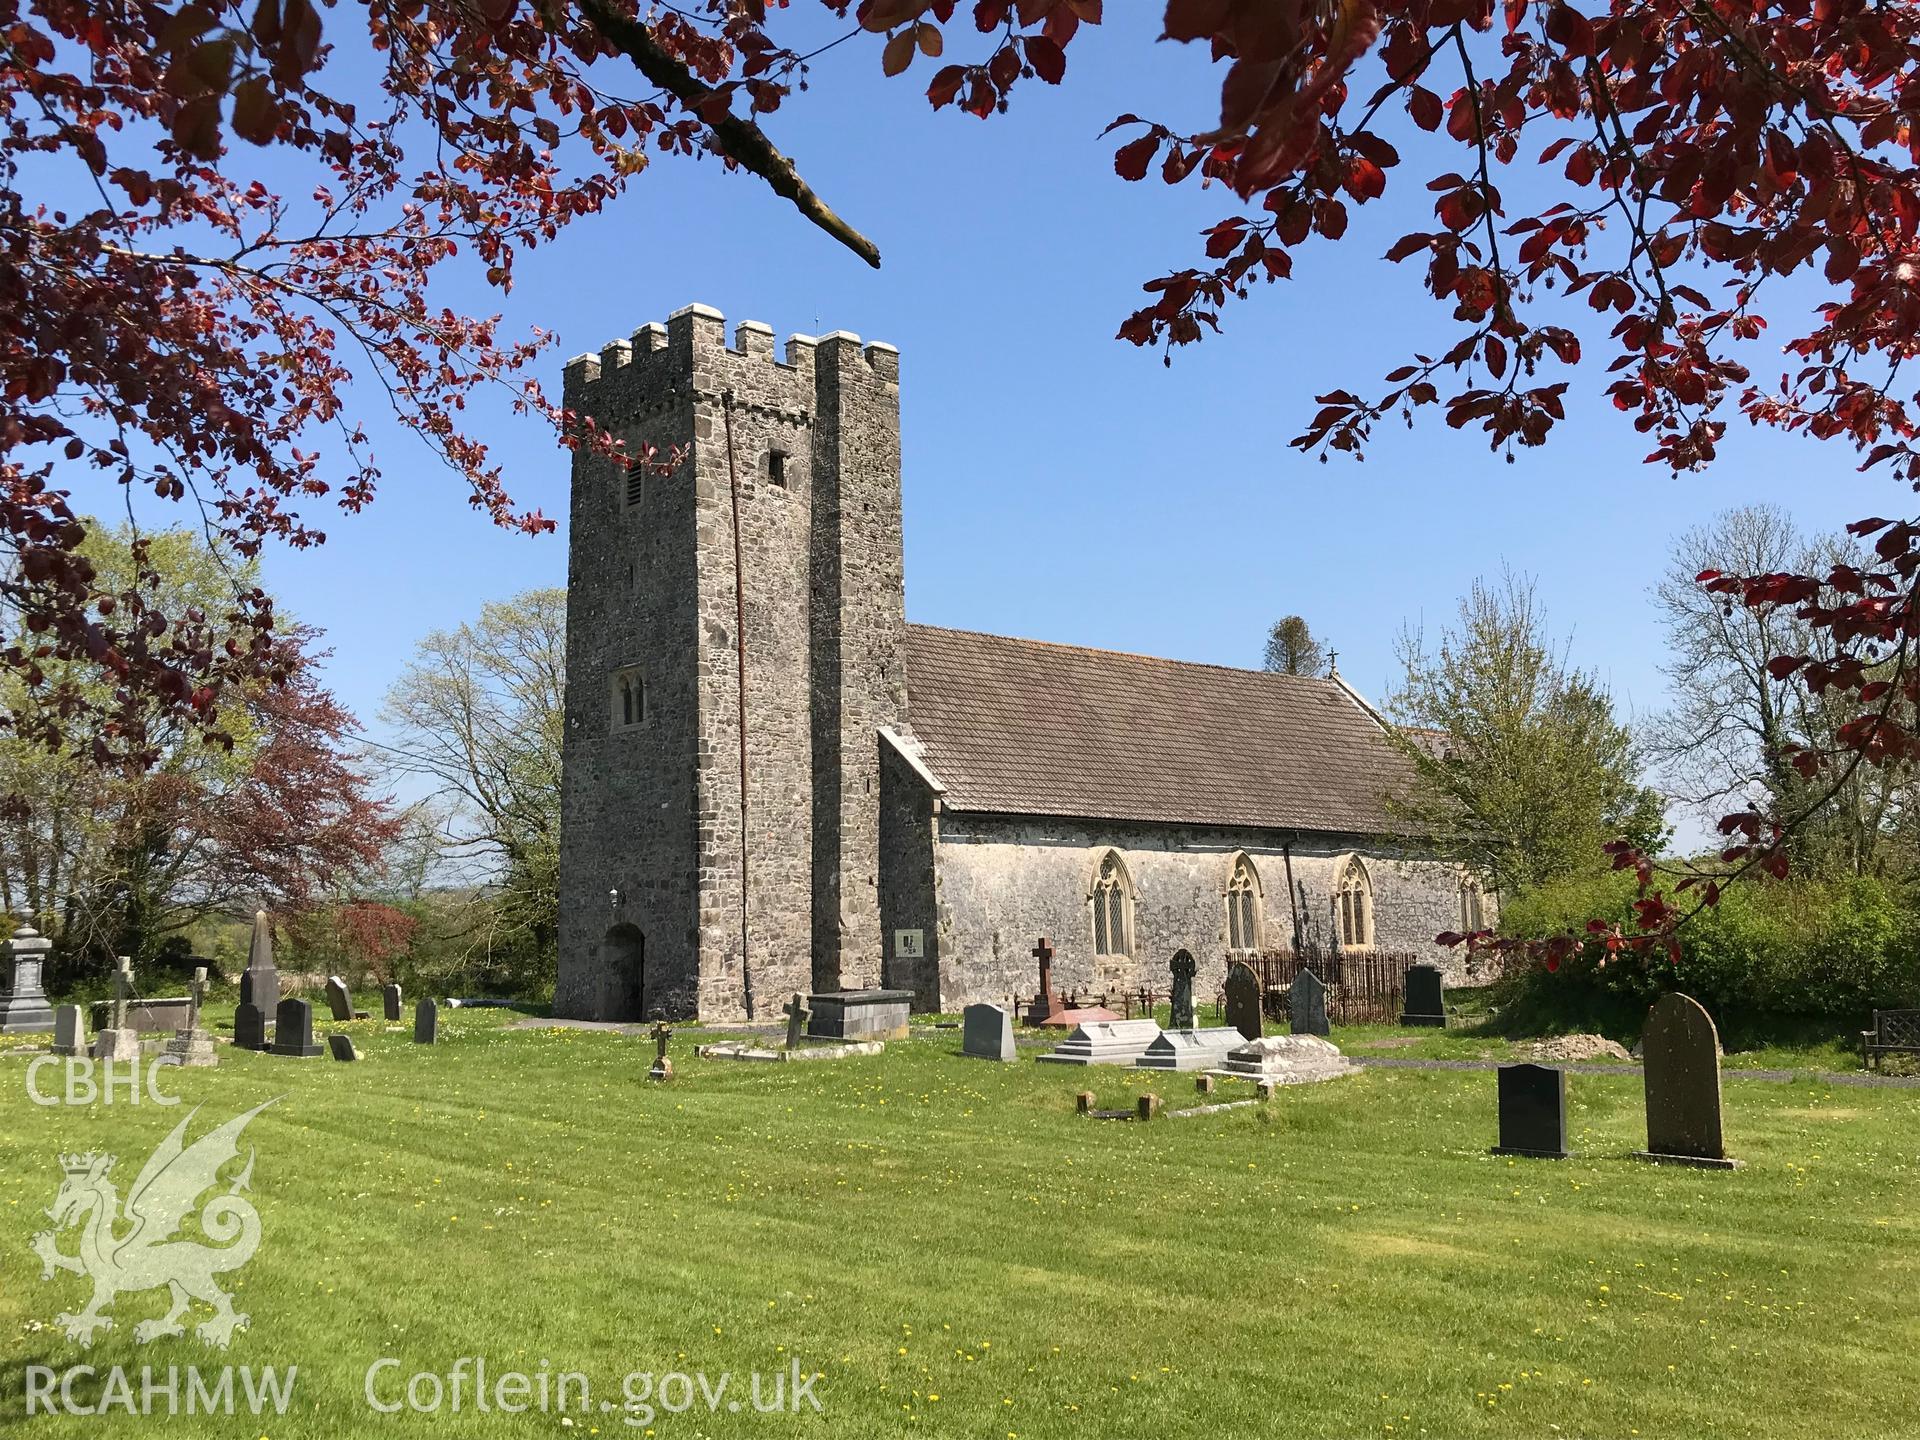 Colour photo showing exterior view of St. Mary Magdalene's or St. Clara's church at St. Clears, taken by Paul R. Davis, 6th May 2018.